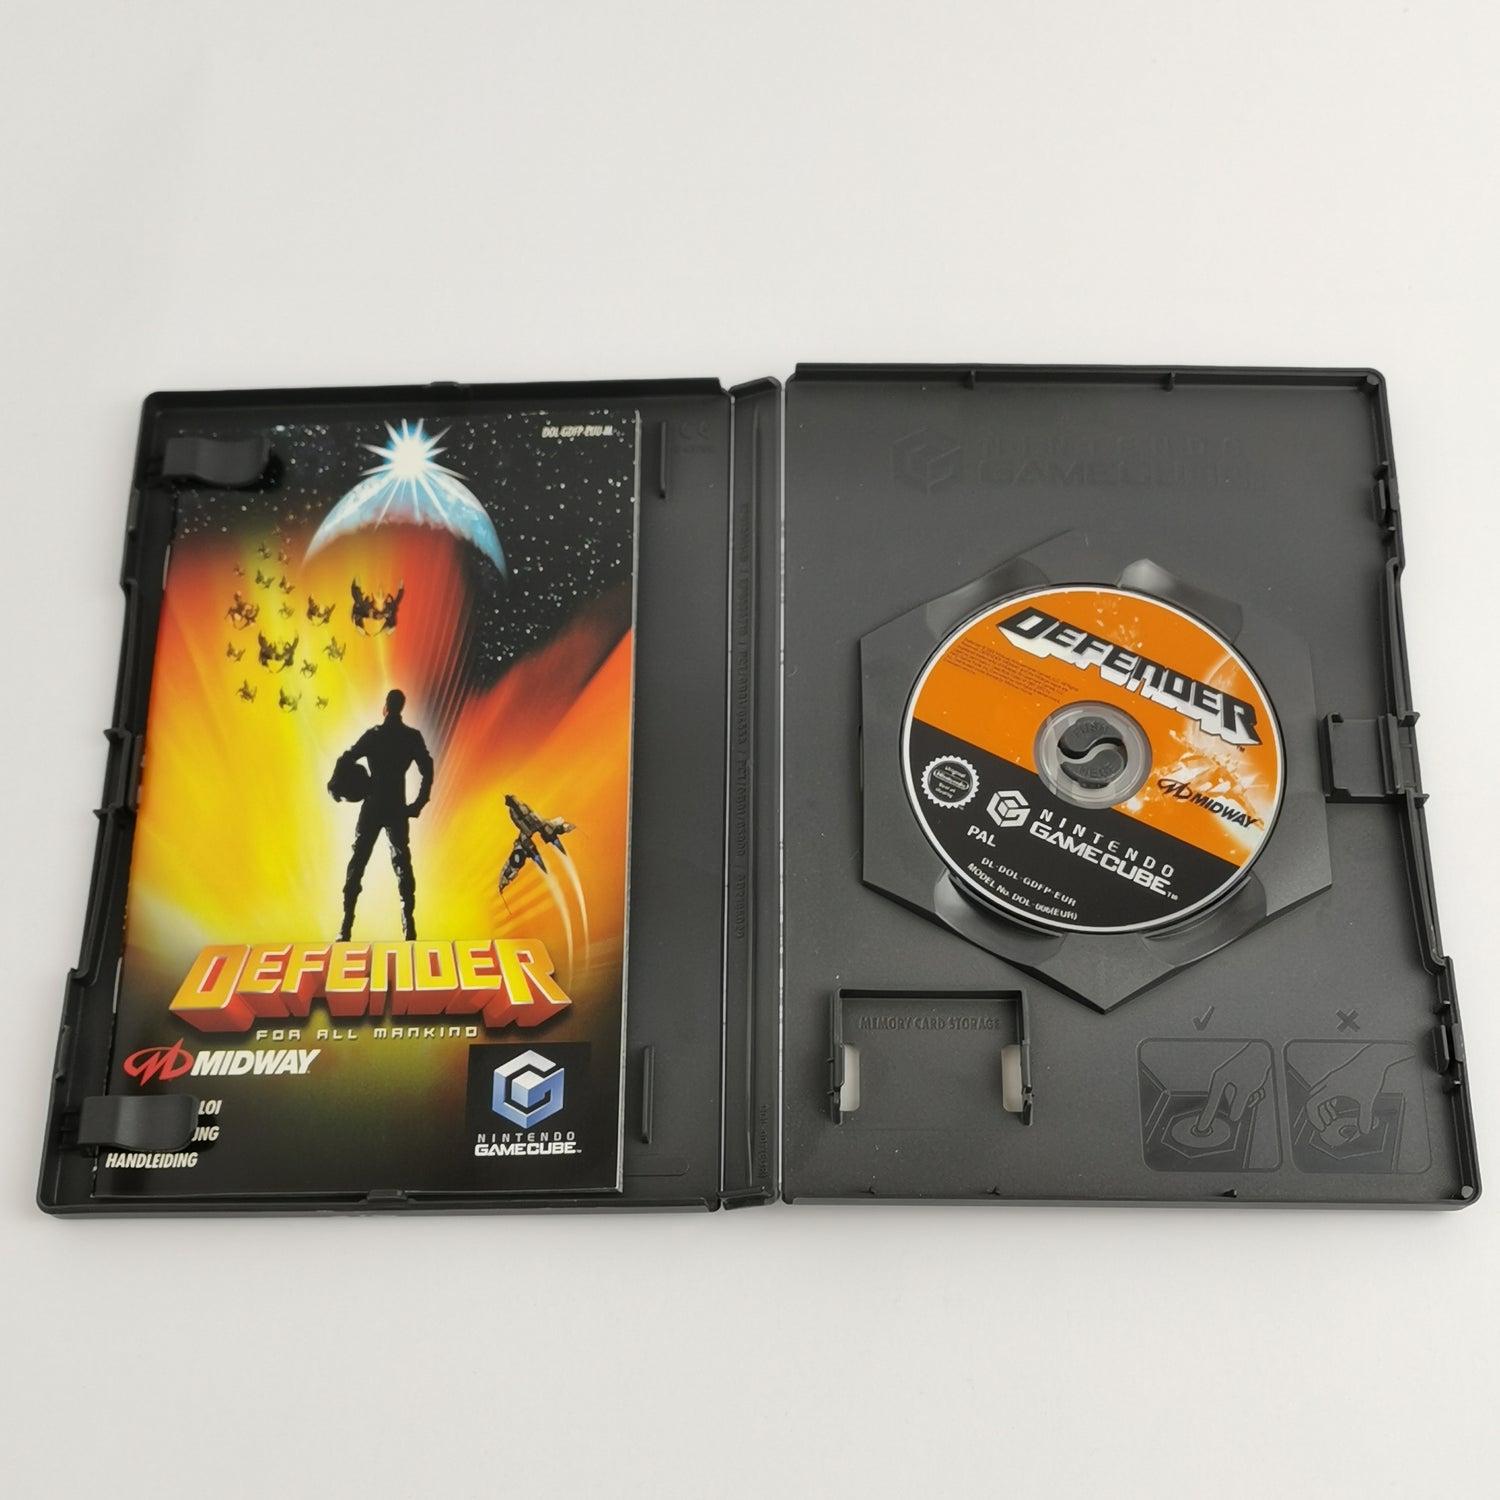 Nintendo Gamecube Game: Defender For All Mankind - Midway | PAL version - original packaging